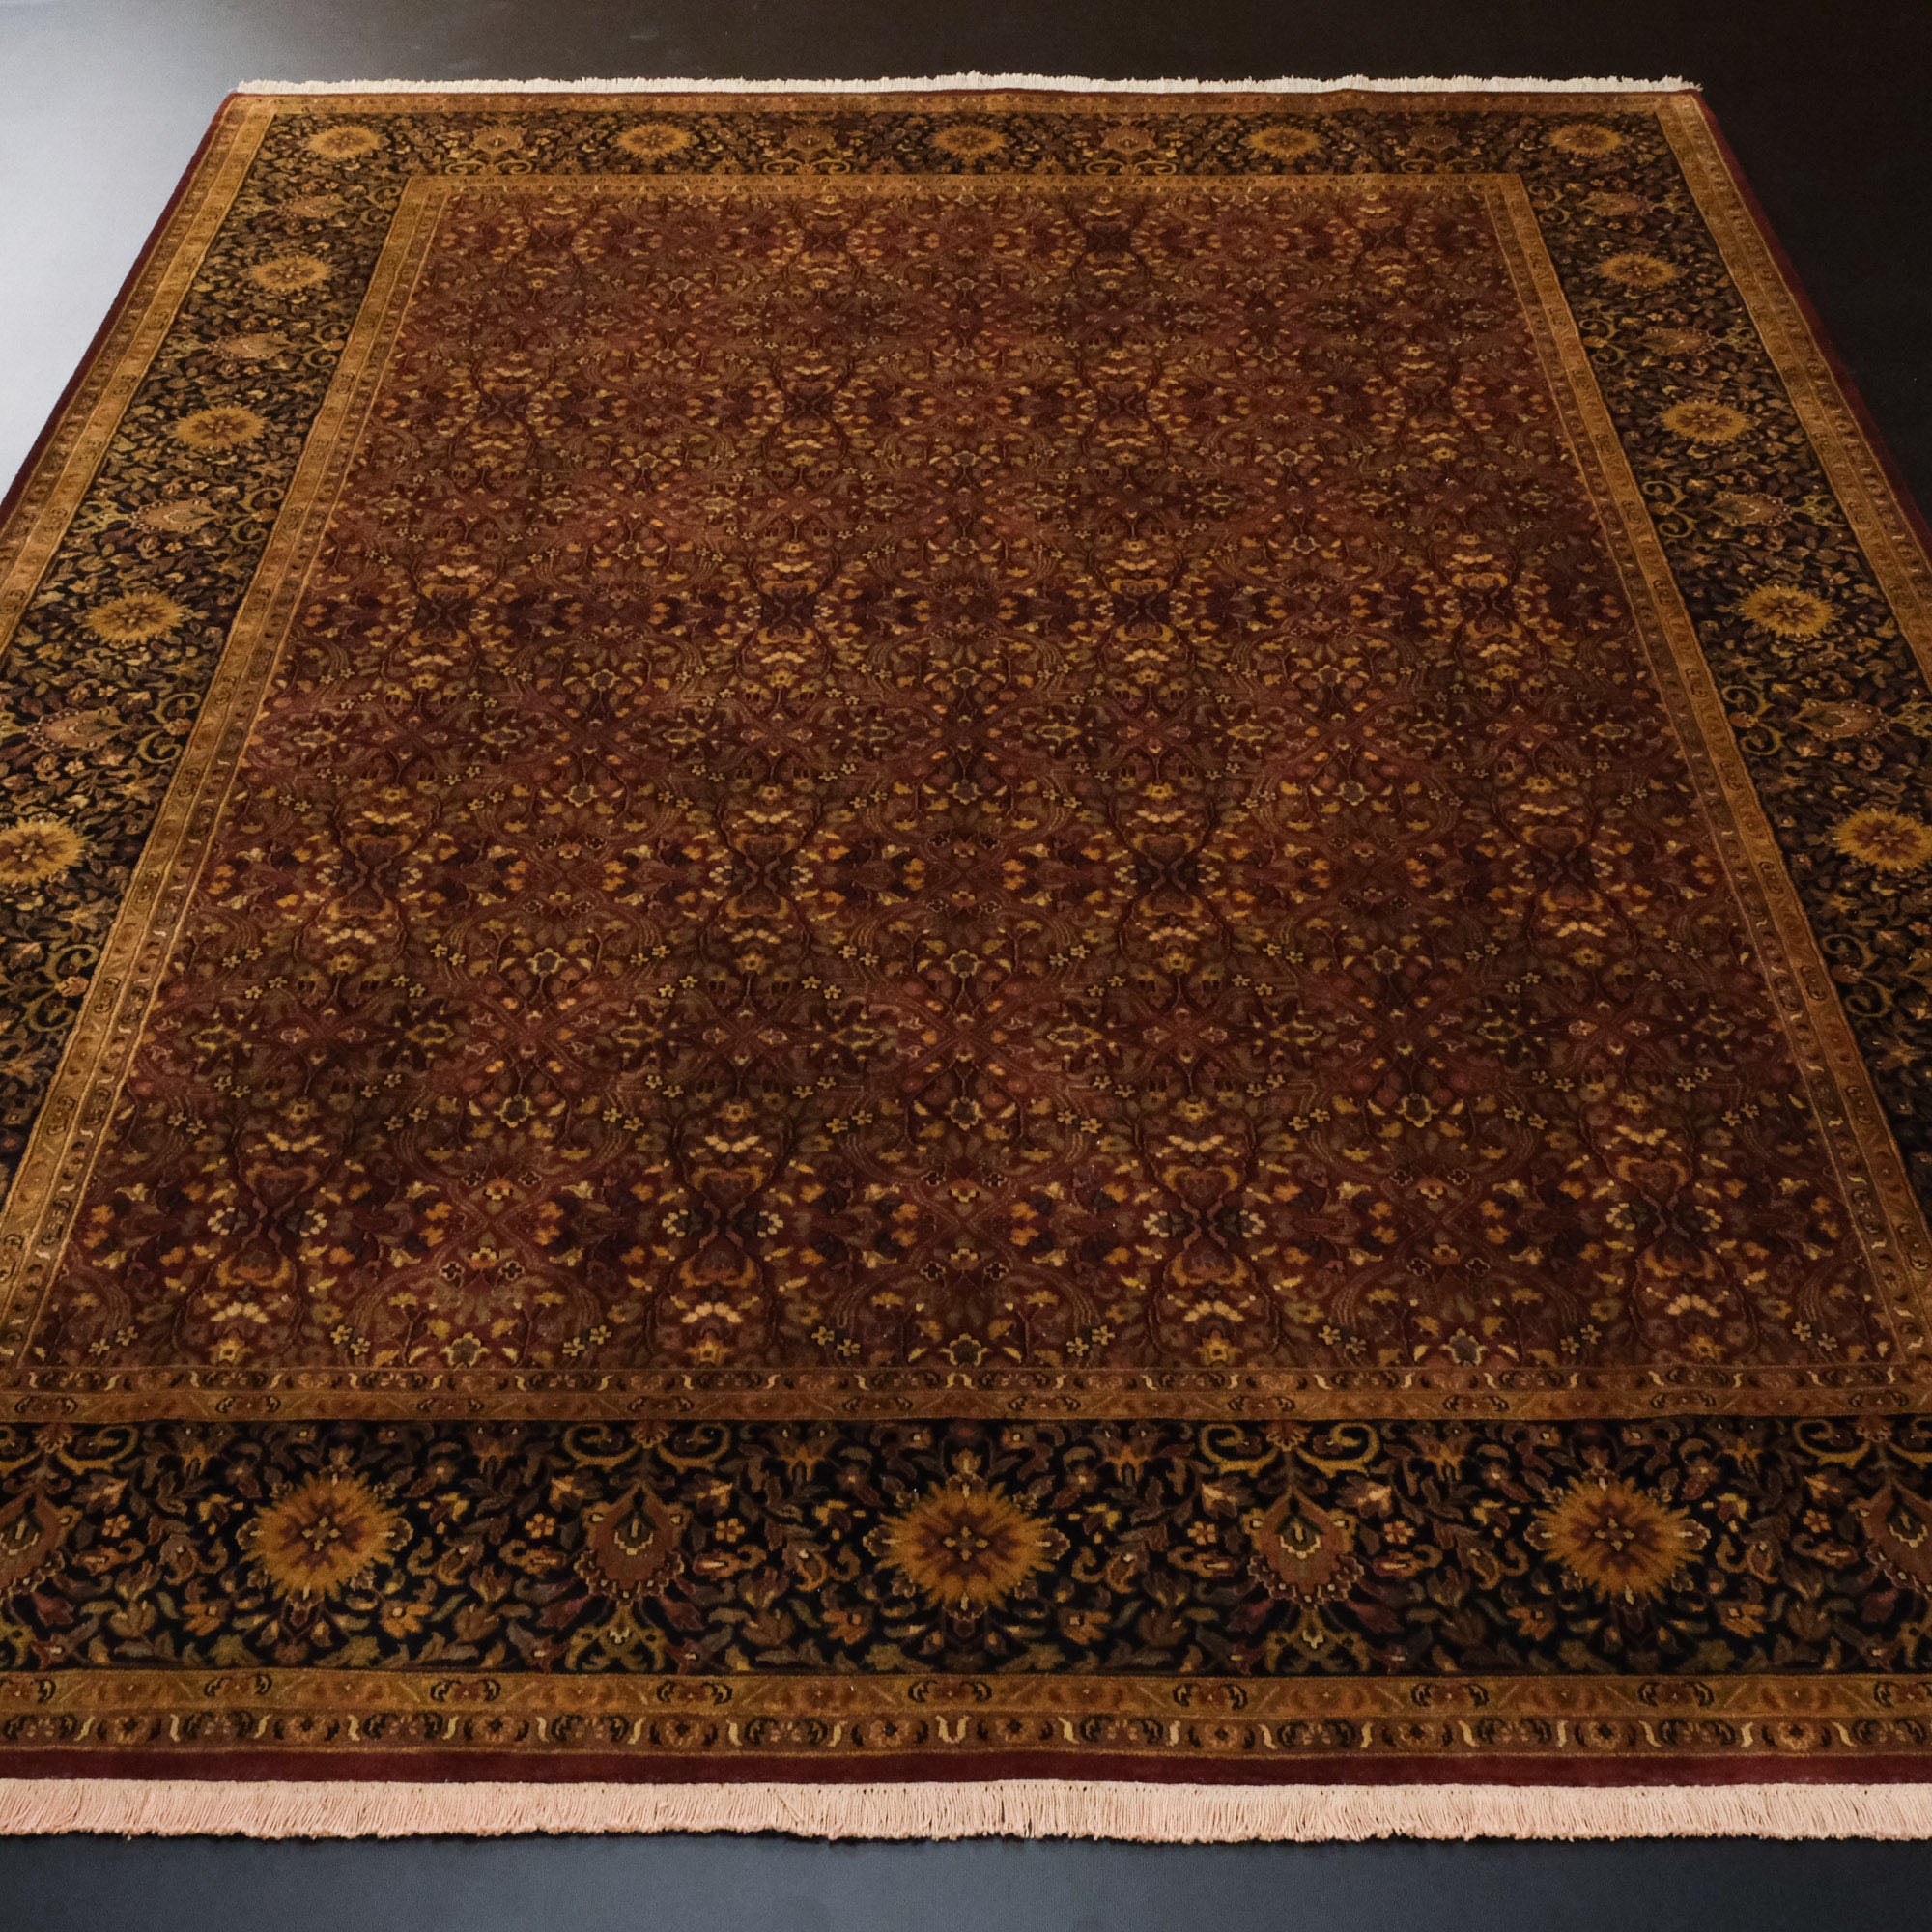 Hand-Woven Persian Patterned Brown Wool Carpet